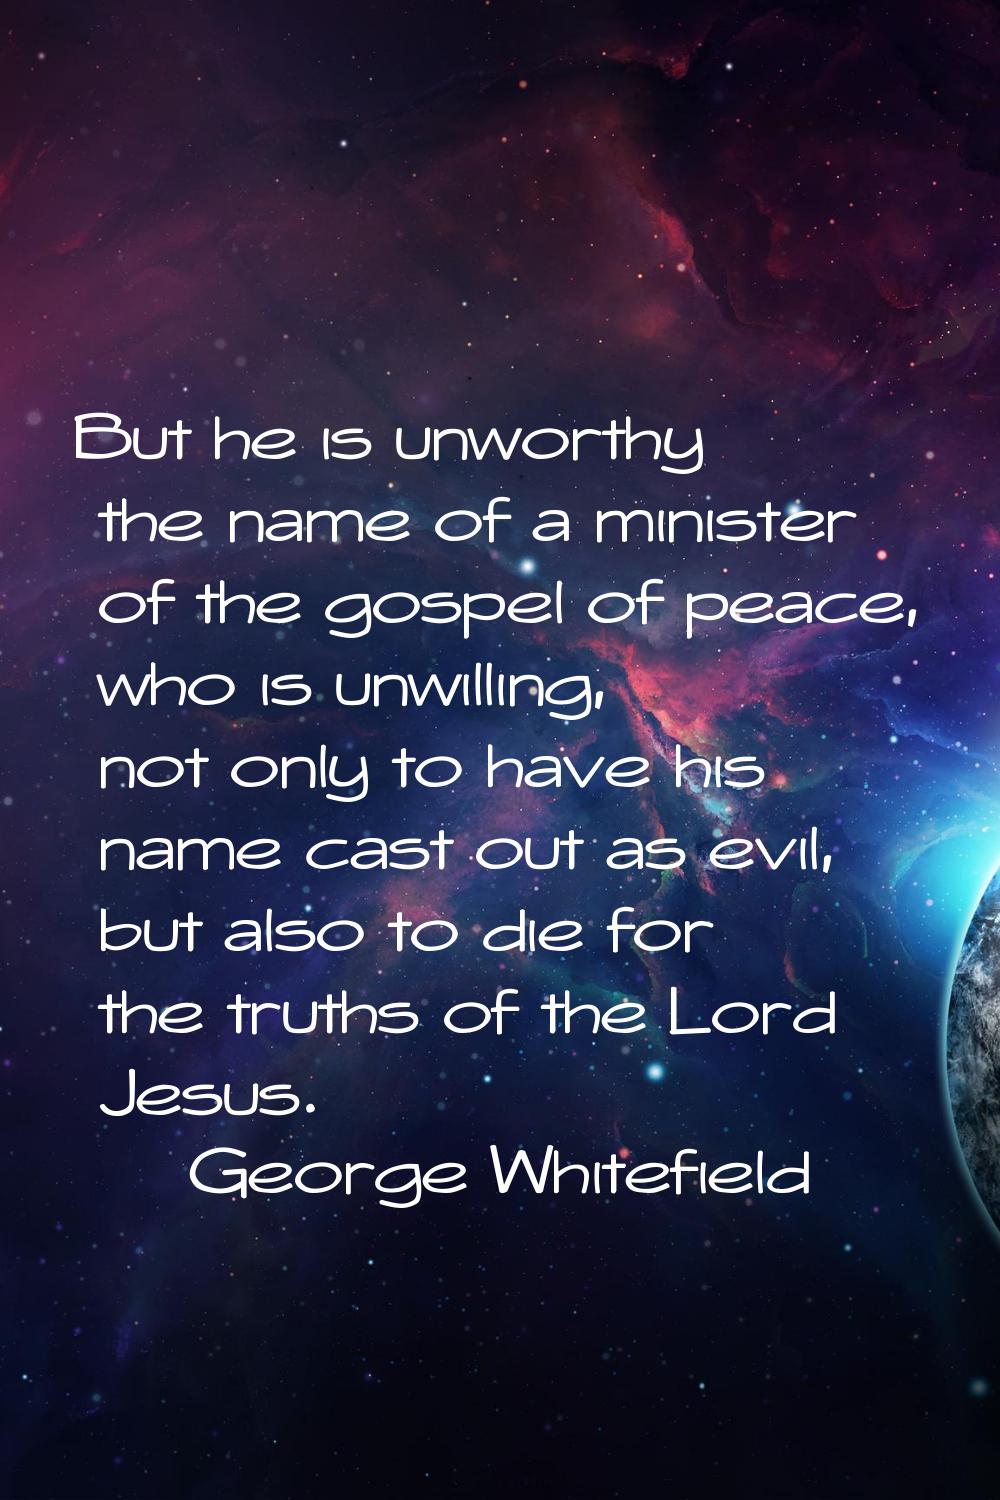 But he is unworthy the name of a minister of the gospel of peace, who is unwilling, not only to hav